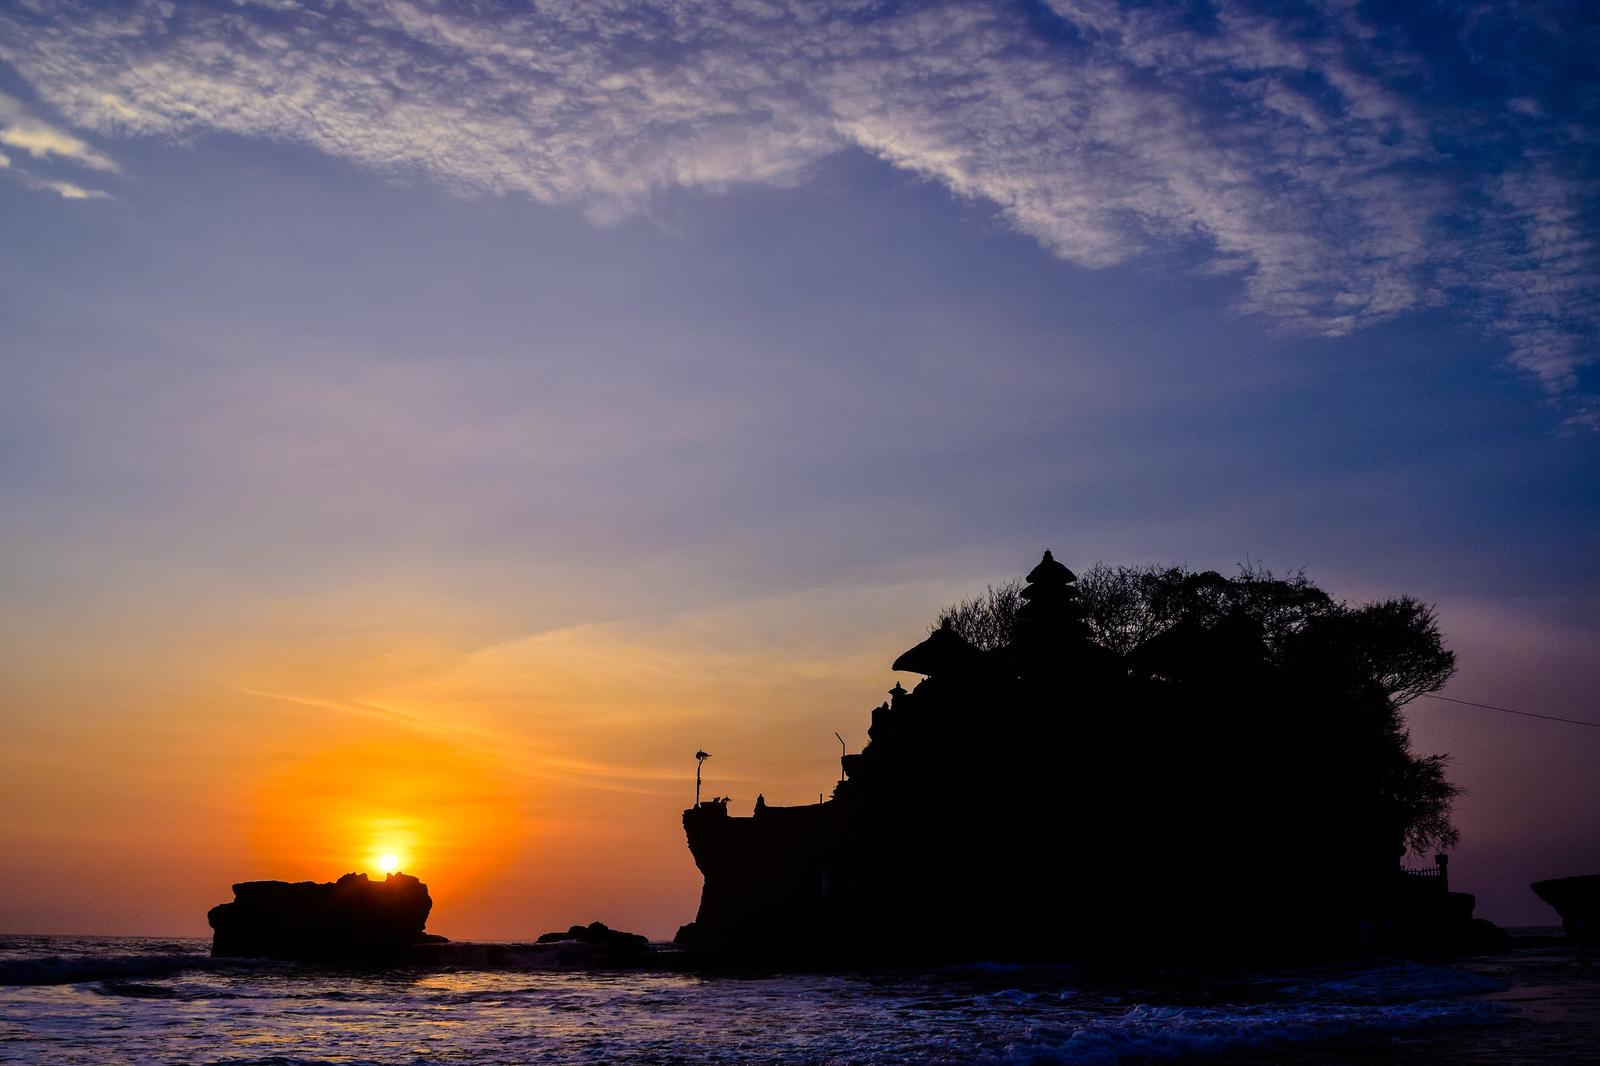 The Silhouettes of Tanah Lot